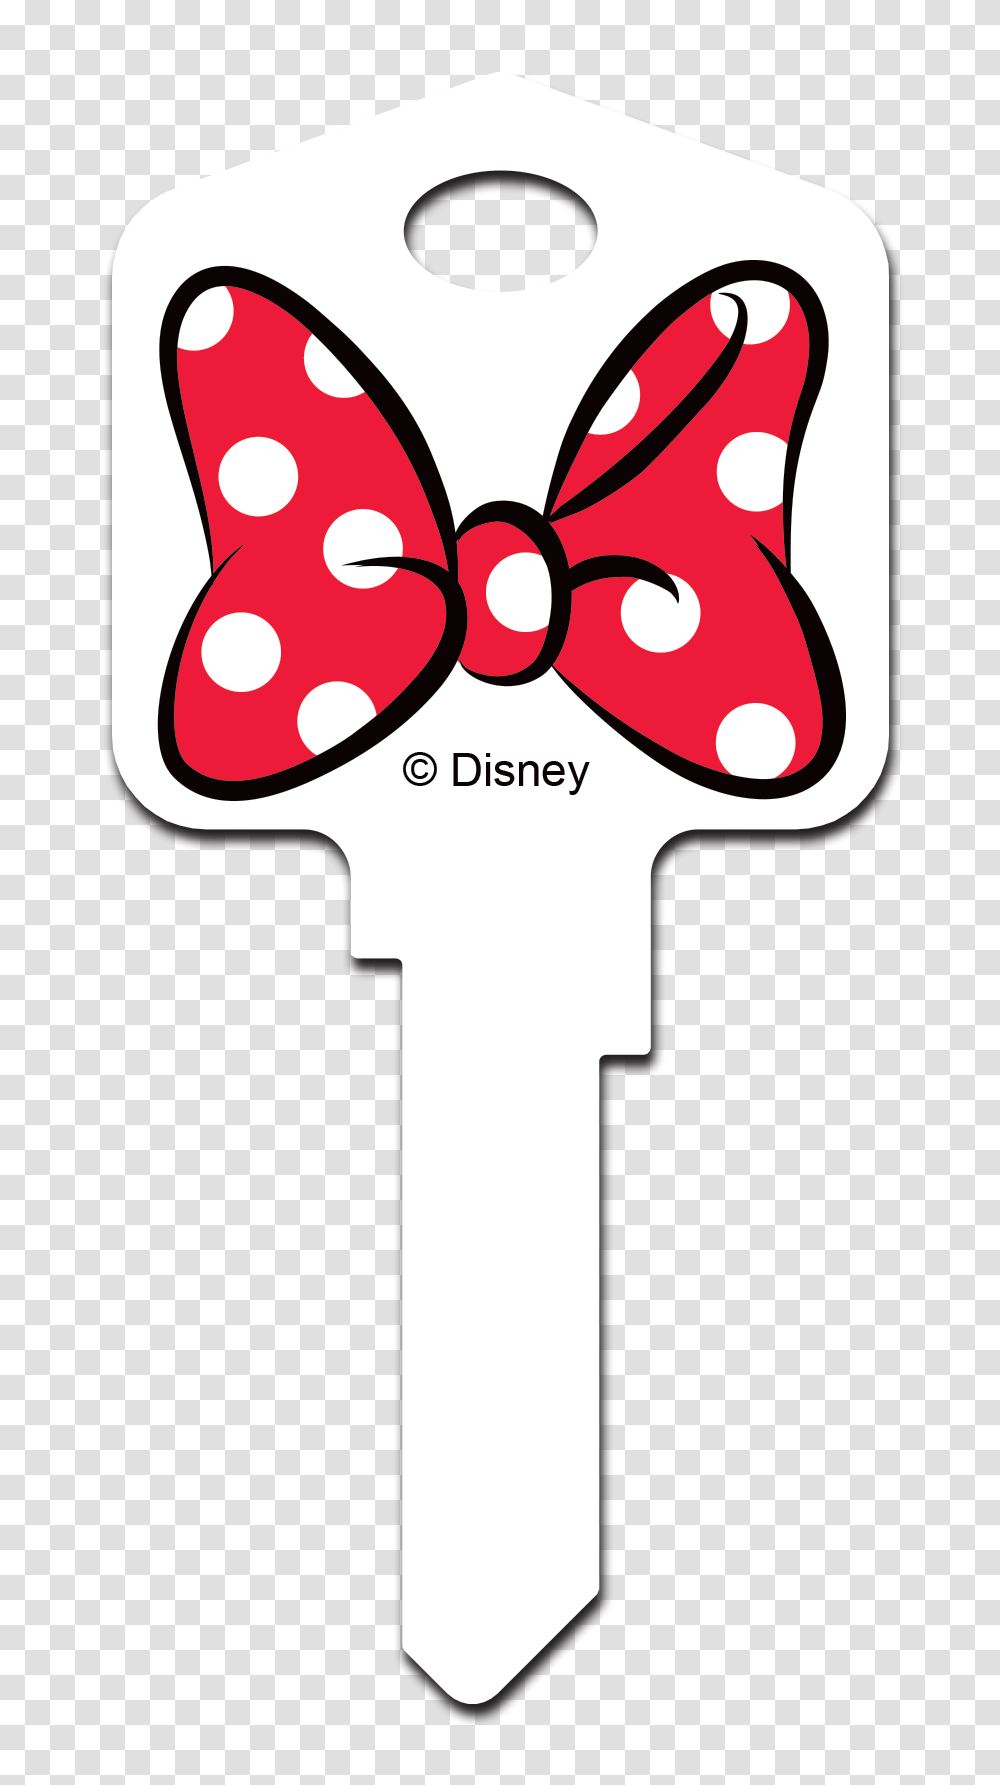 Disney Minnie Mouse Bow House Key, Tie, Accessories, Accessory Transparent Png